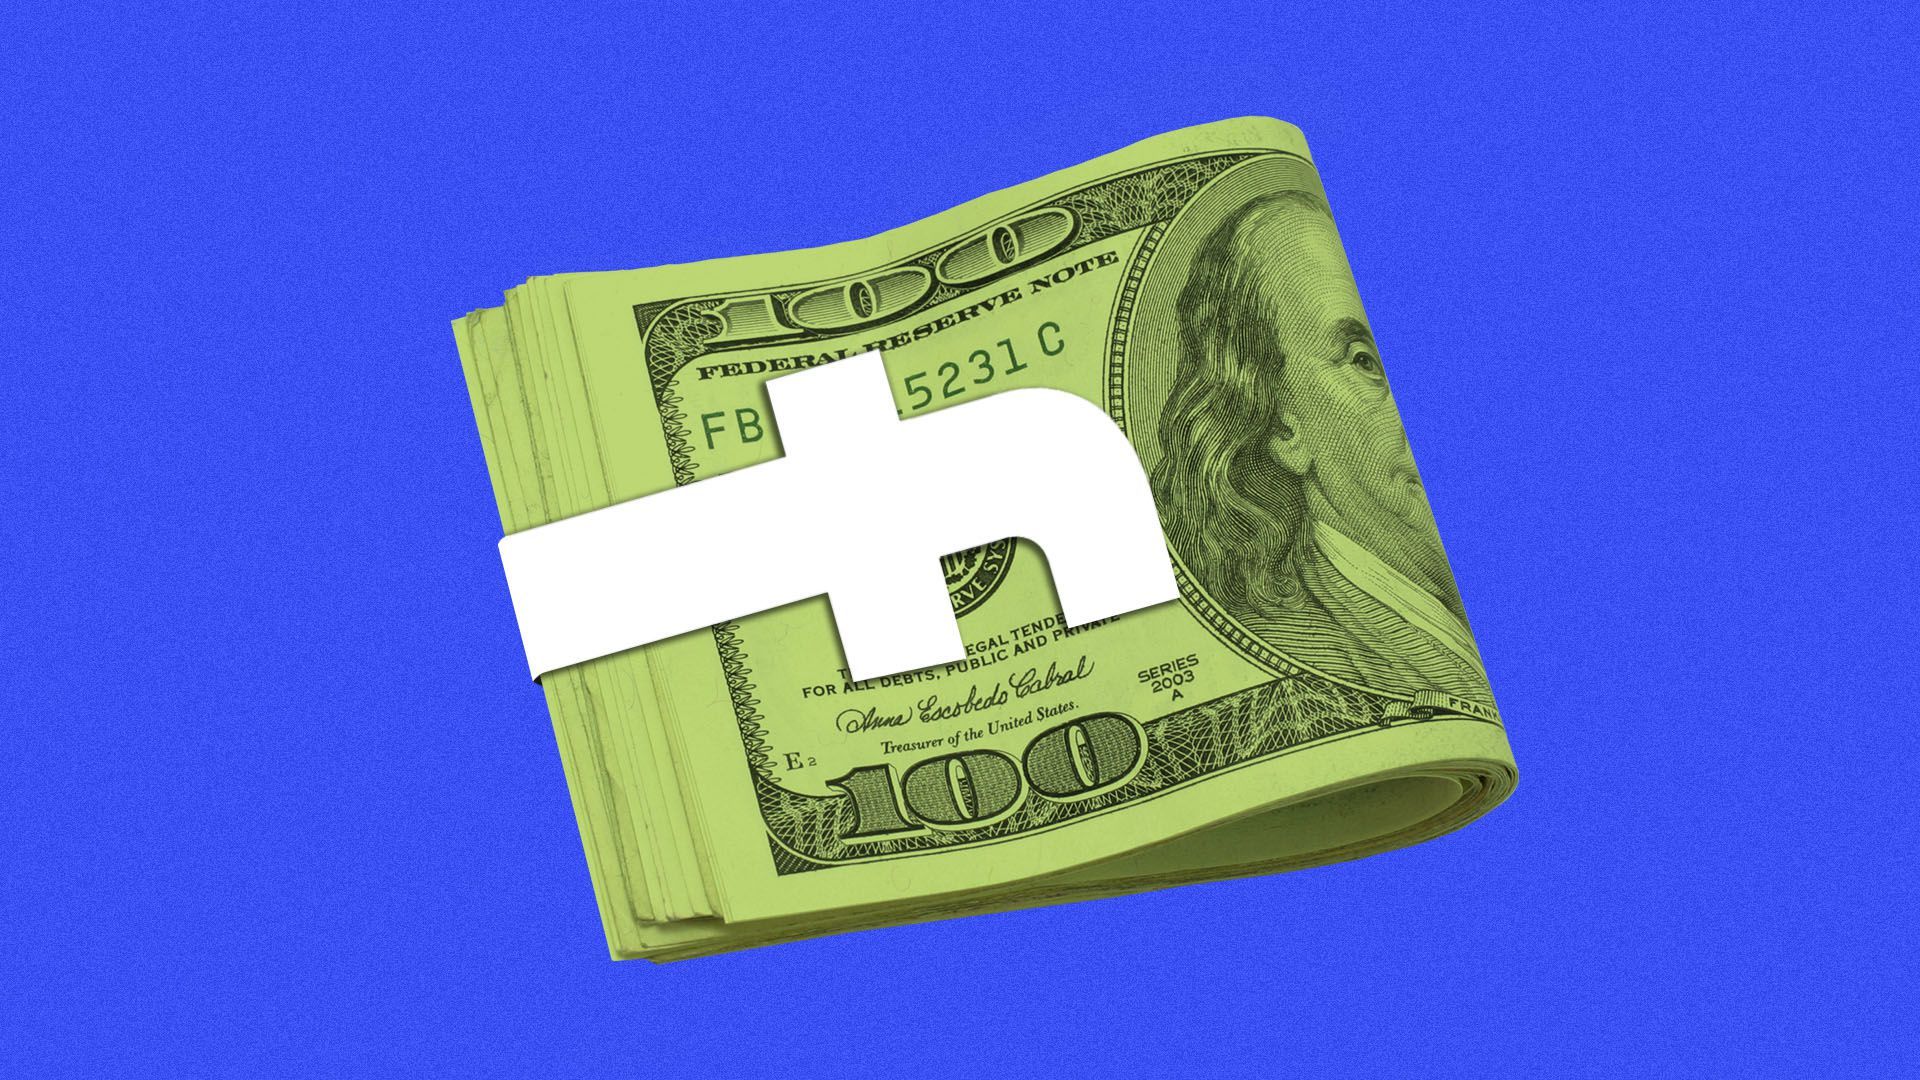 Illustration of a collection of 100 dollar bills with money clip shaped like the facebook logo